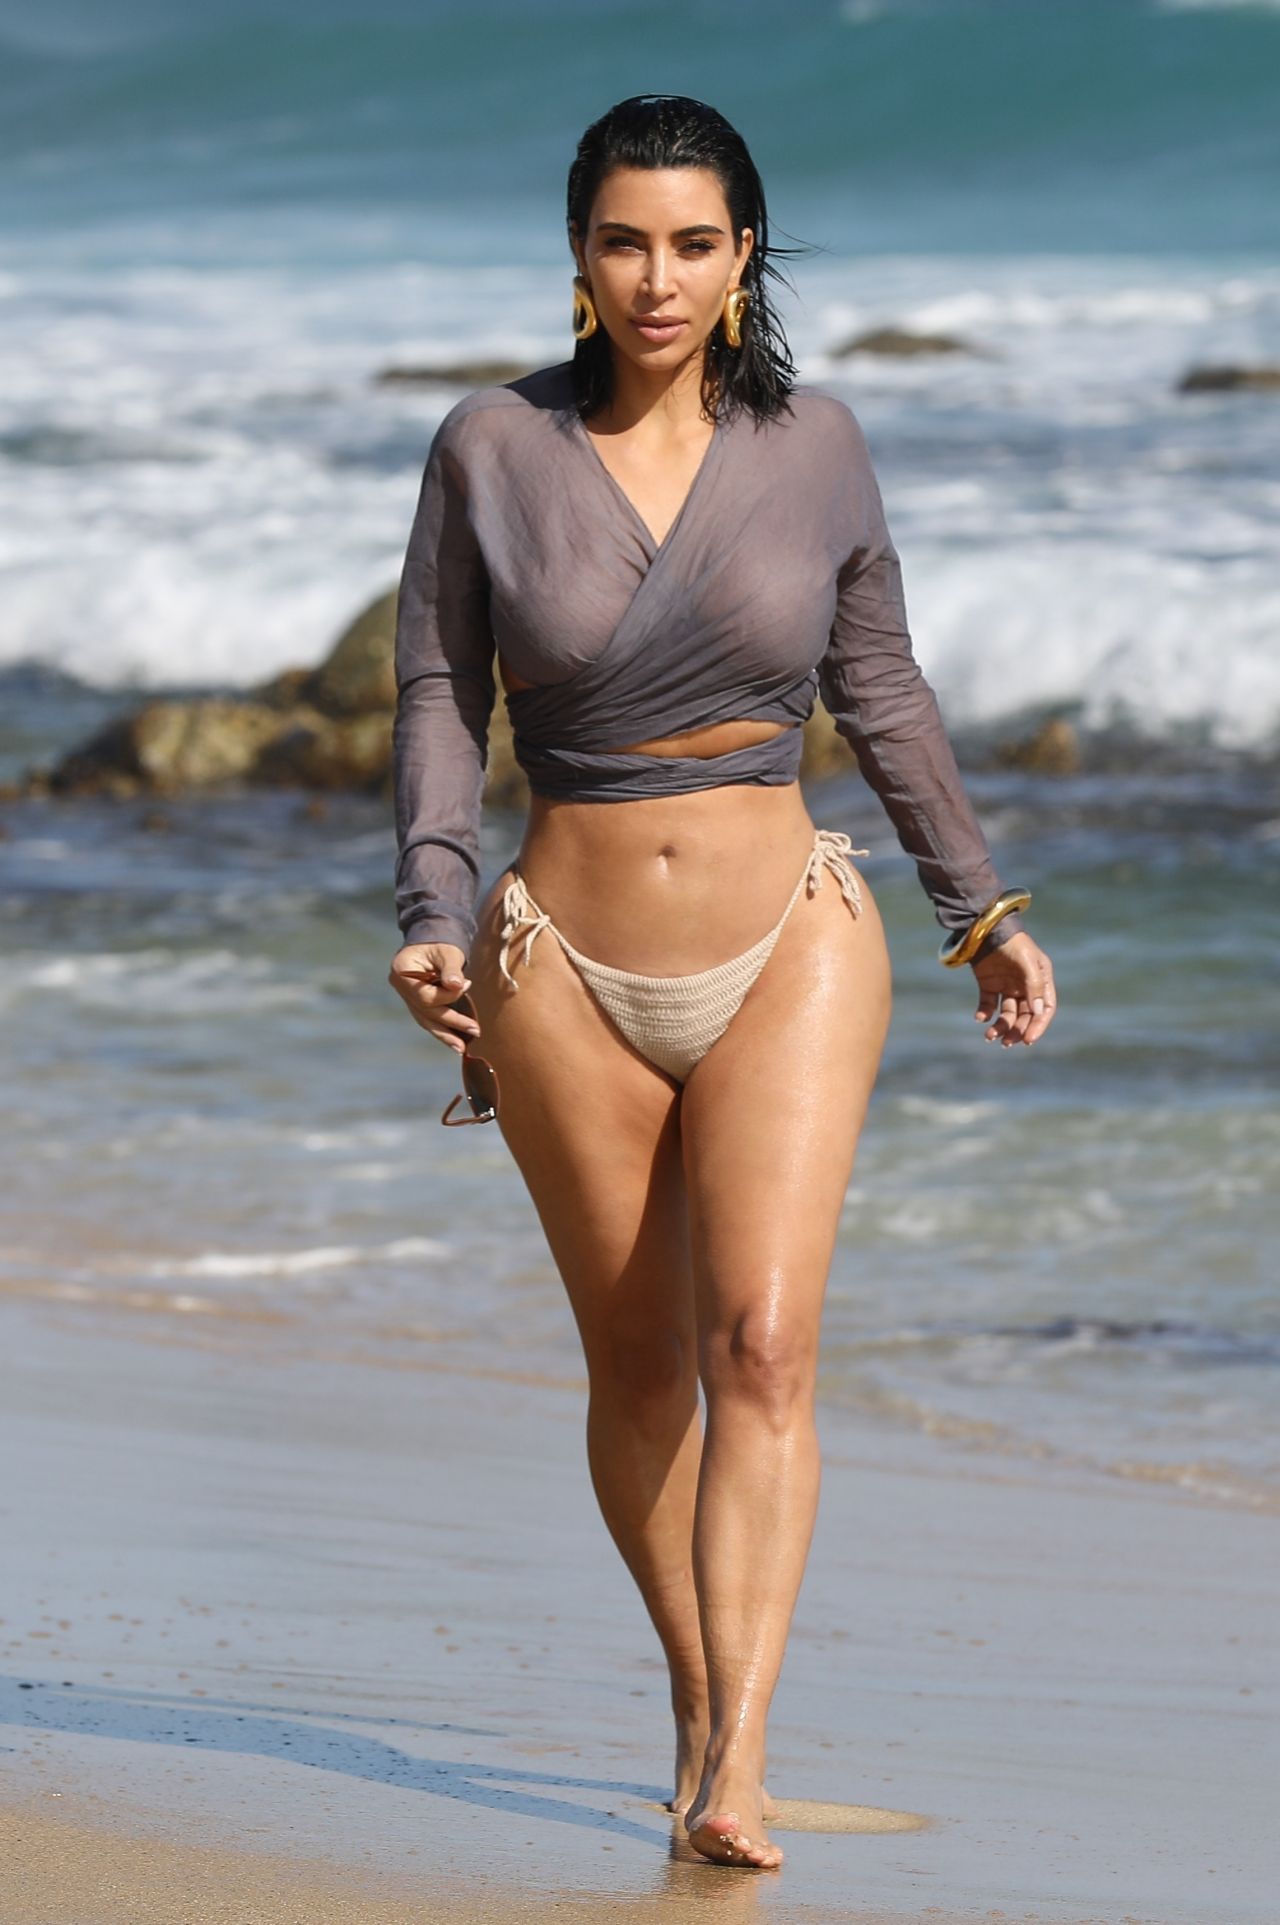 Sex tape star Kim Kardashian flaunting her BIG round ass and tits on the beach